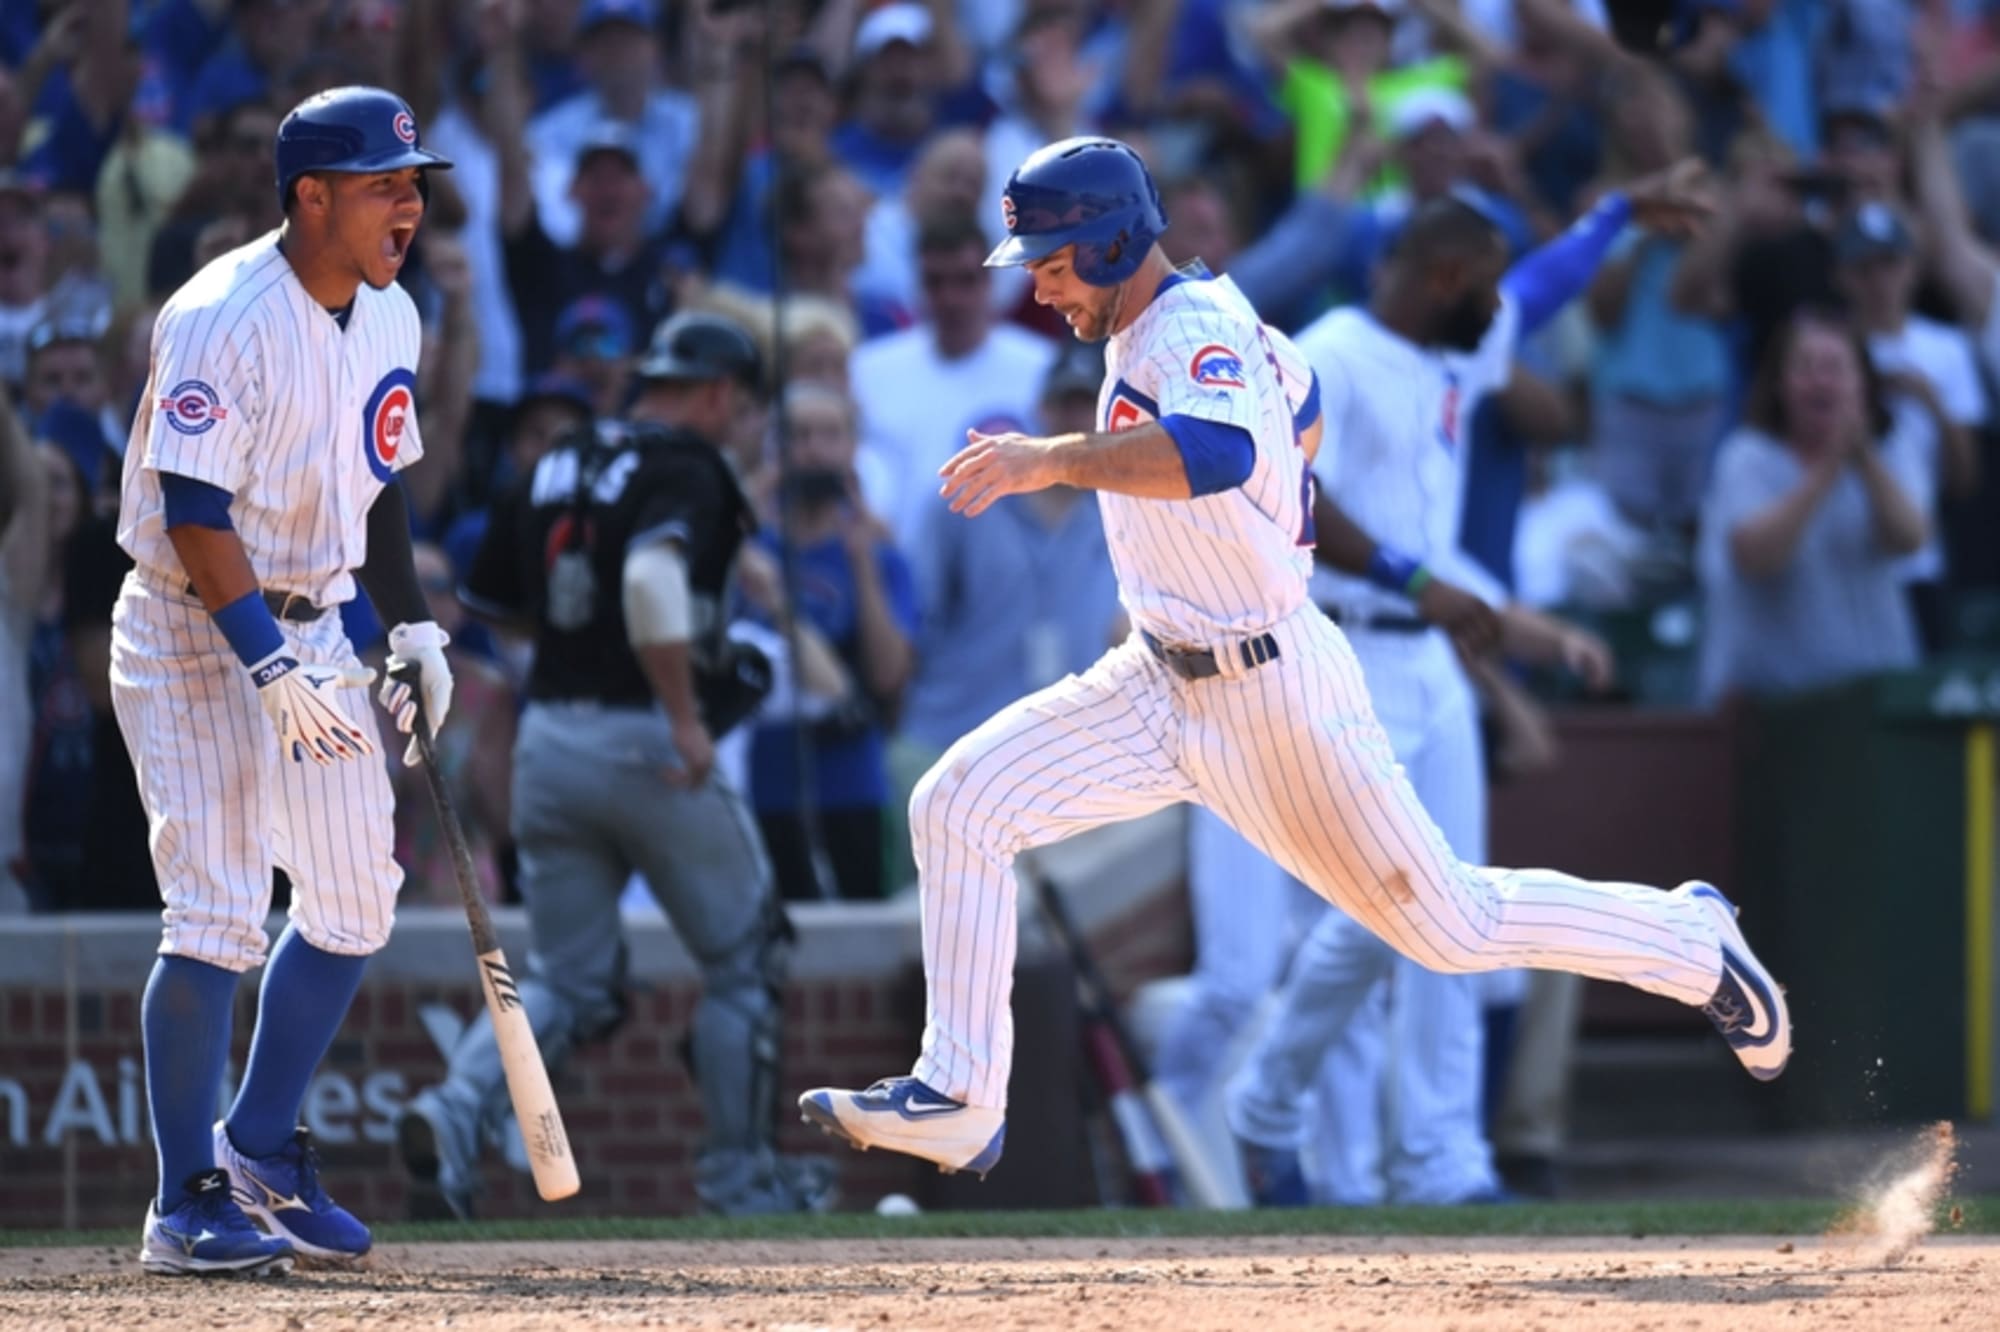 Cubs Complete Sweep of Marlins After Ramos Meltdown